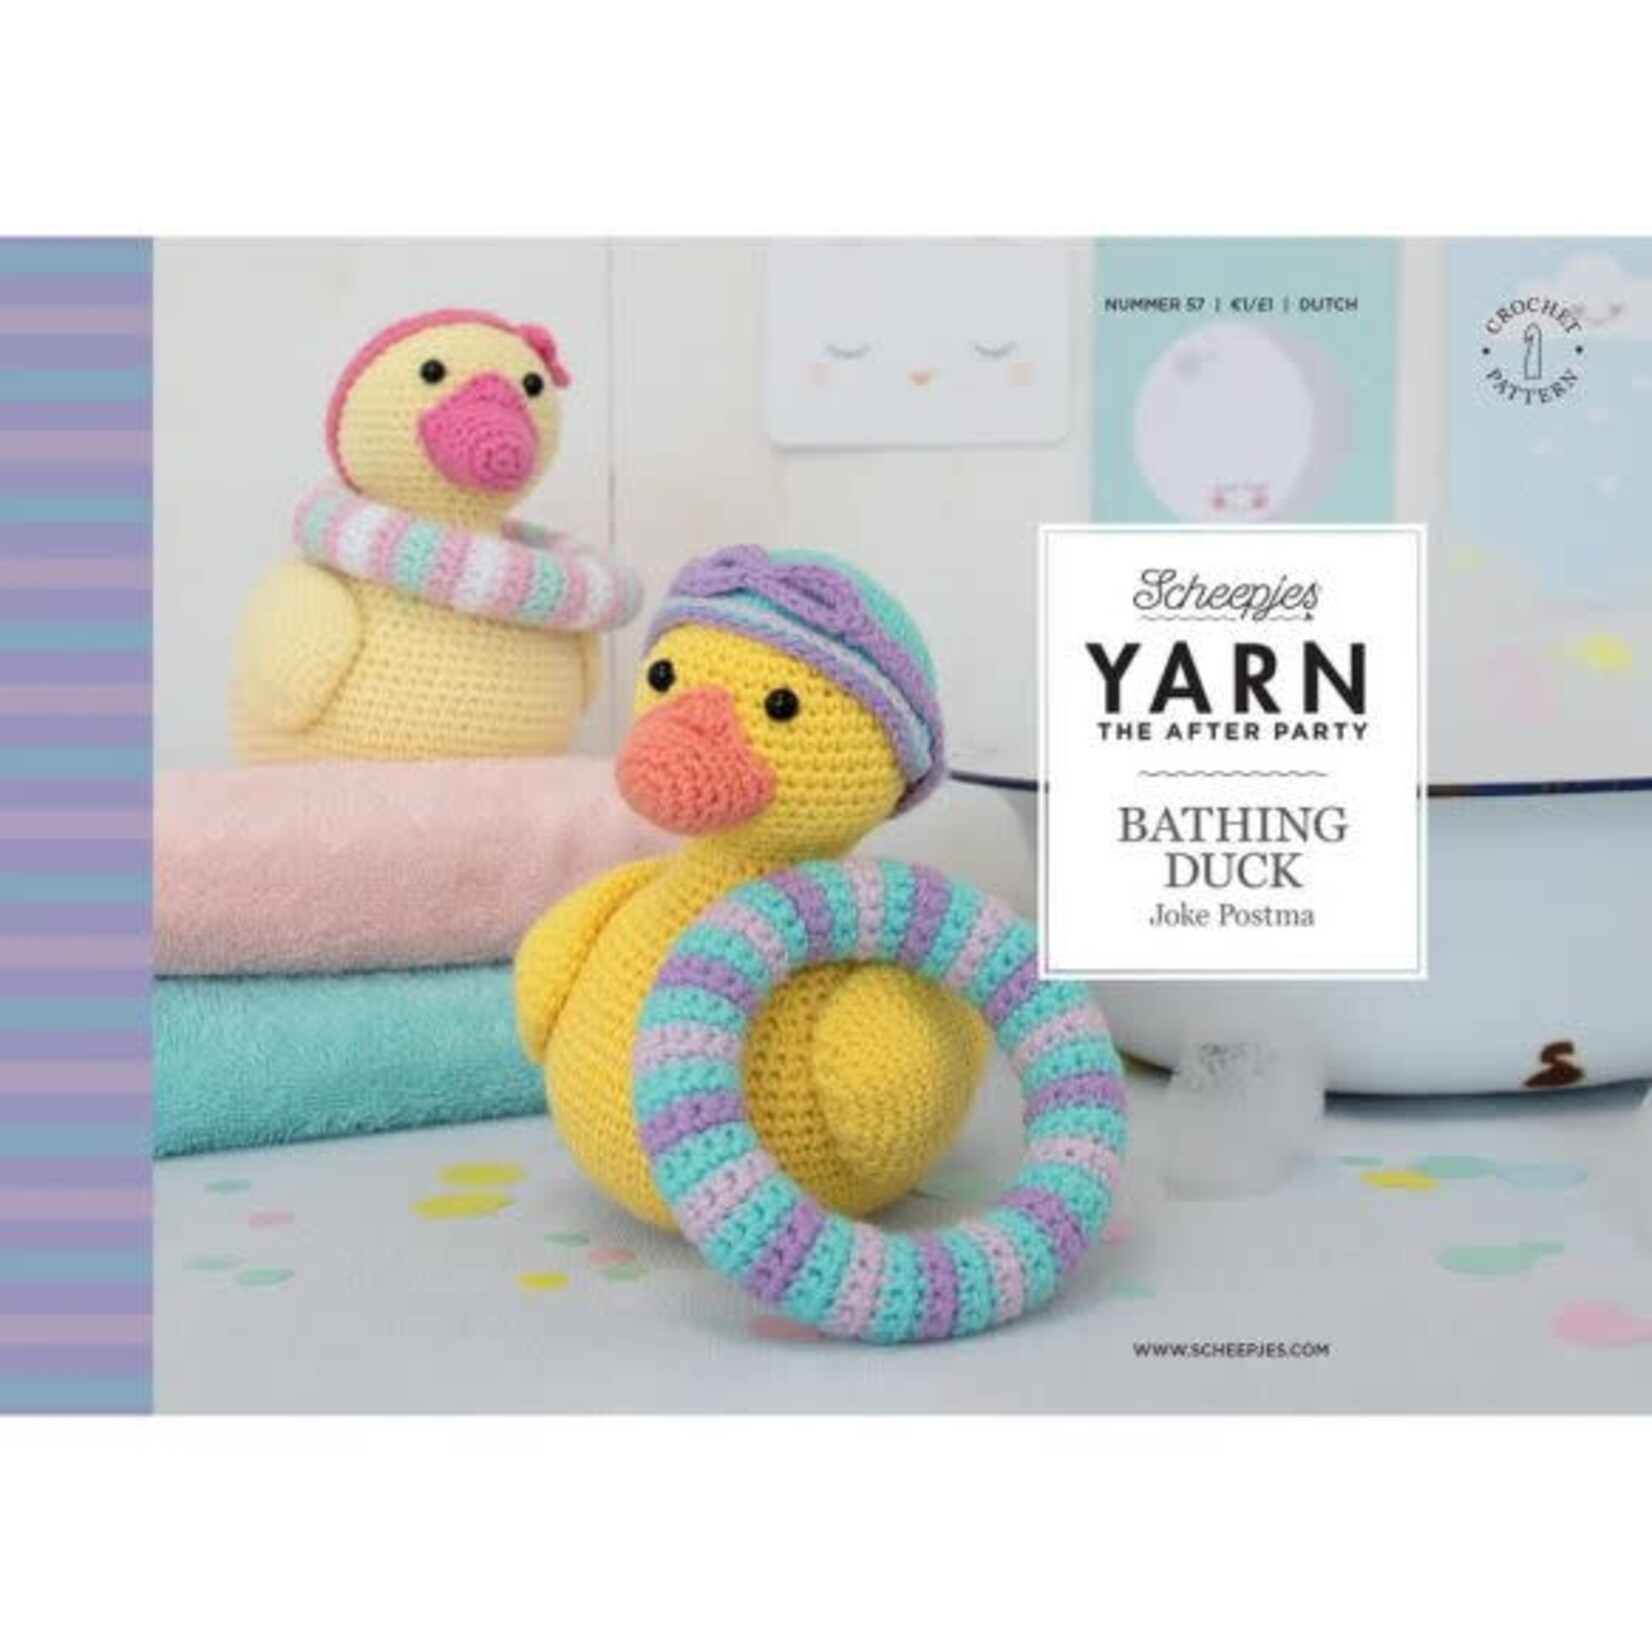 Scheepjes YARN The After Party nr.57 Bathing Duck NL